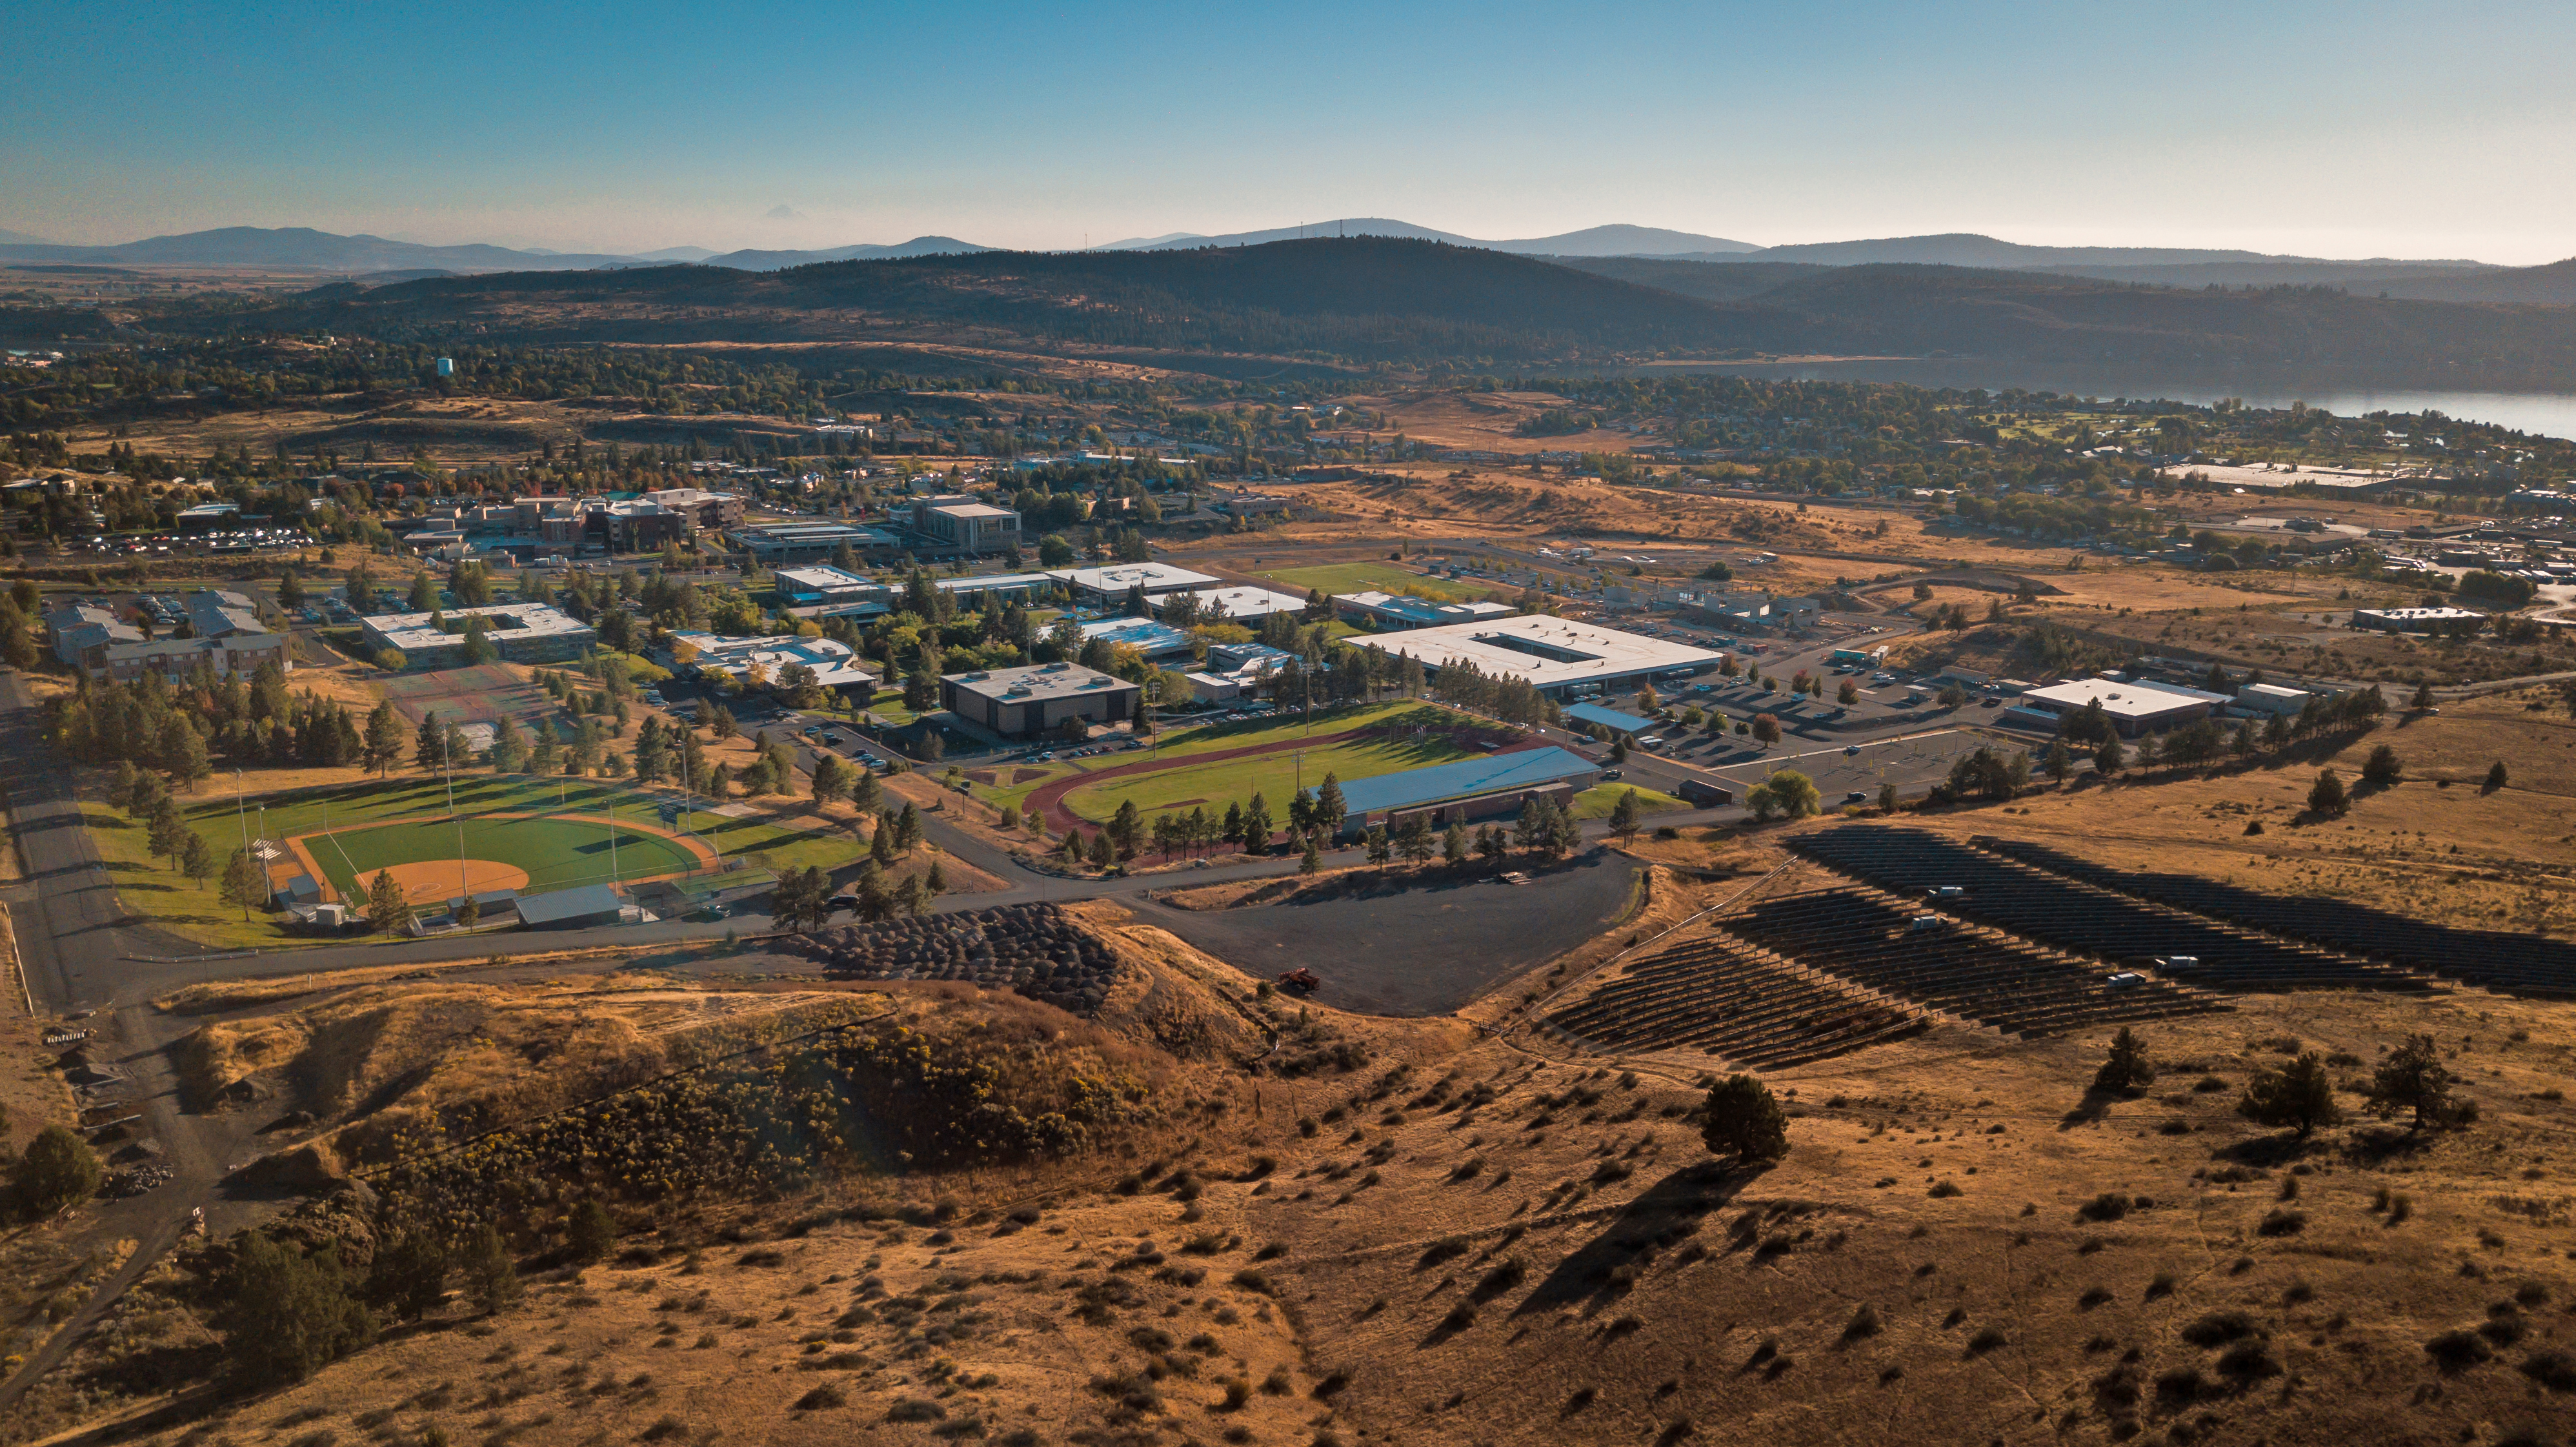 Picture of KF campus from the hill overlooking it